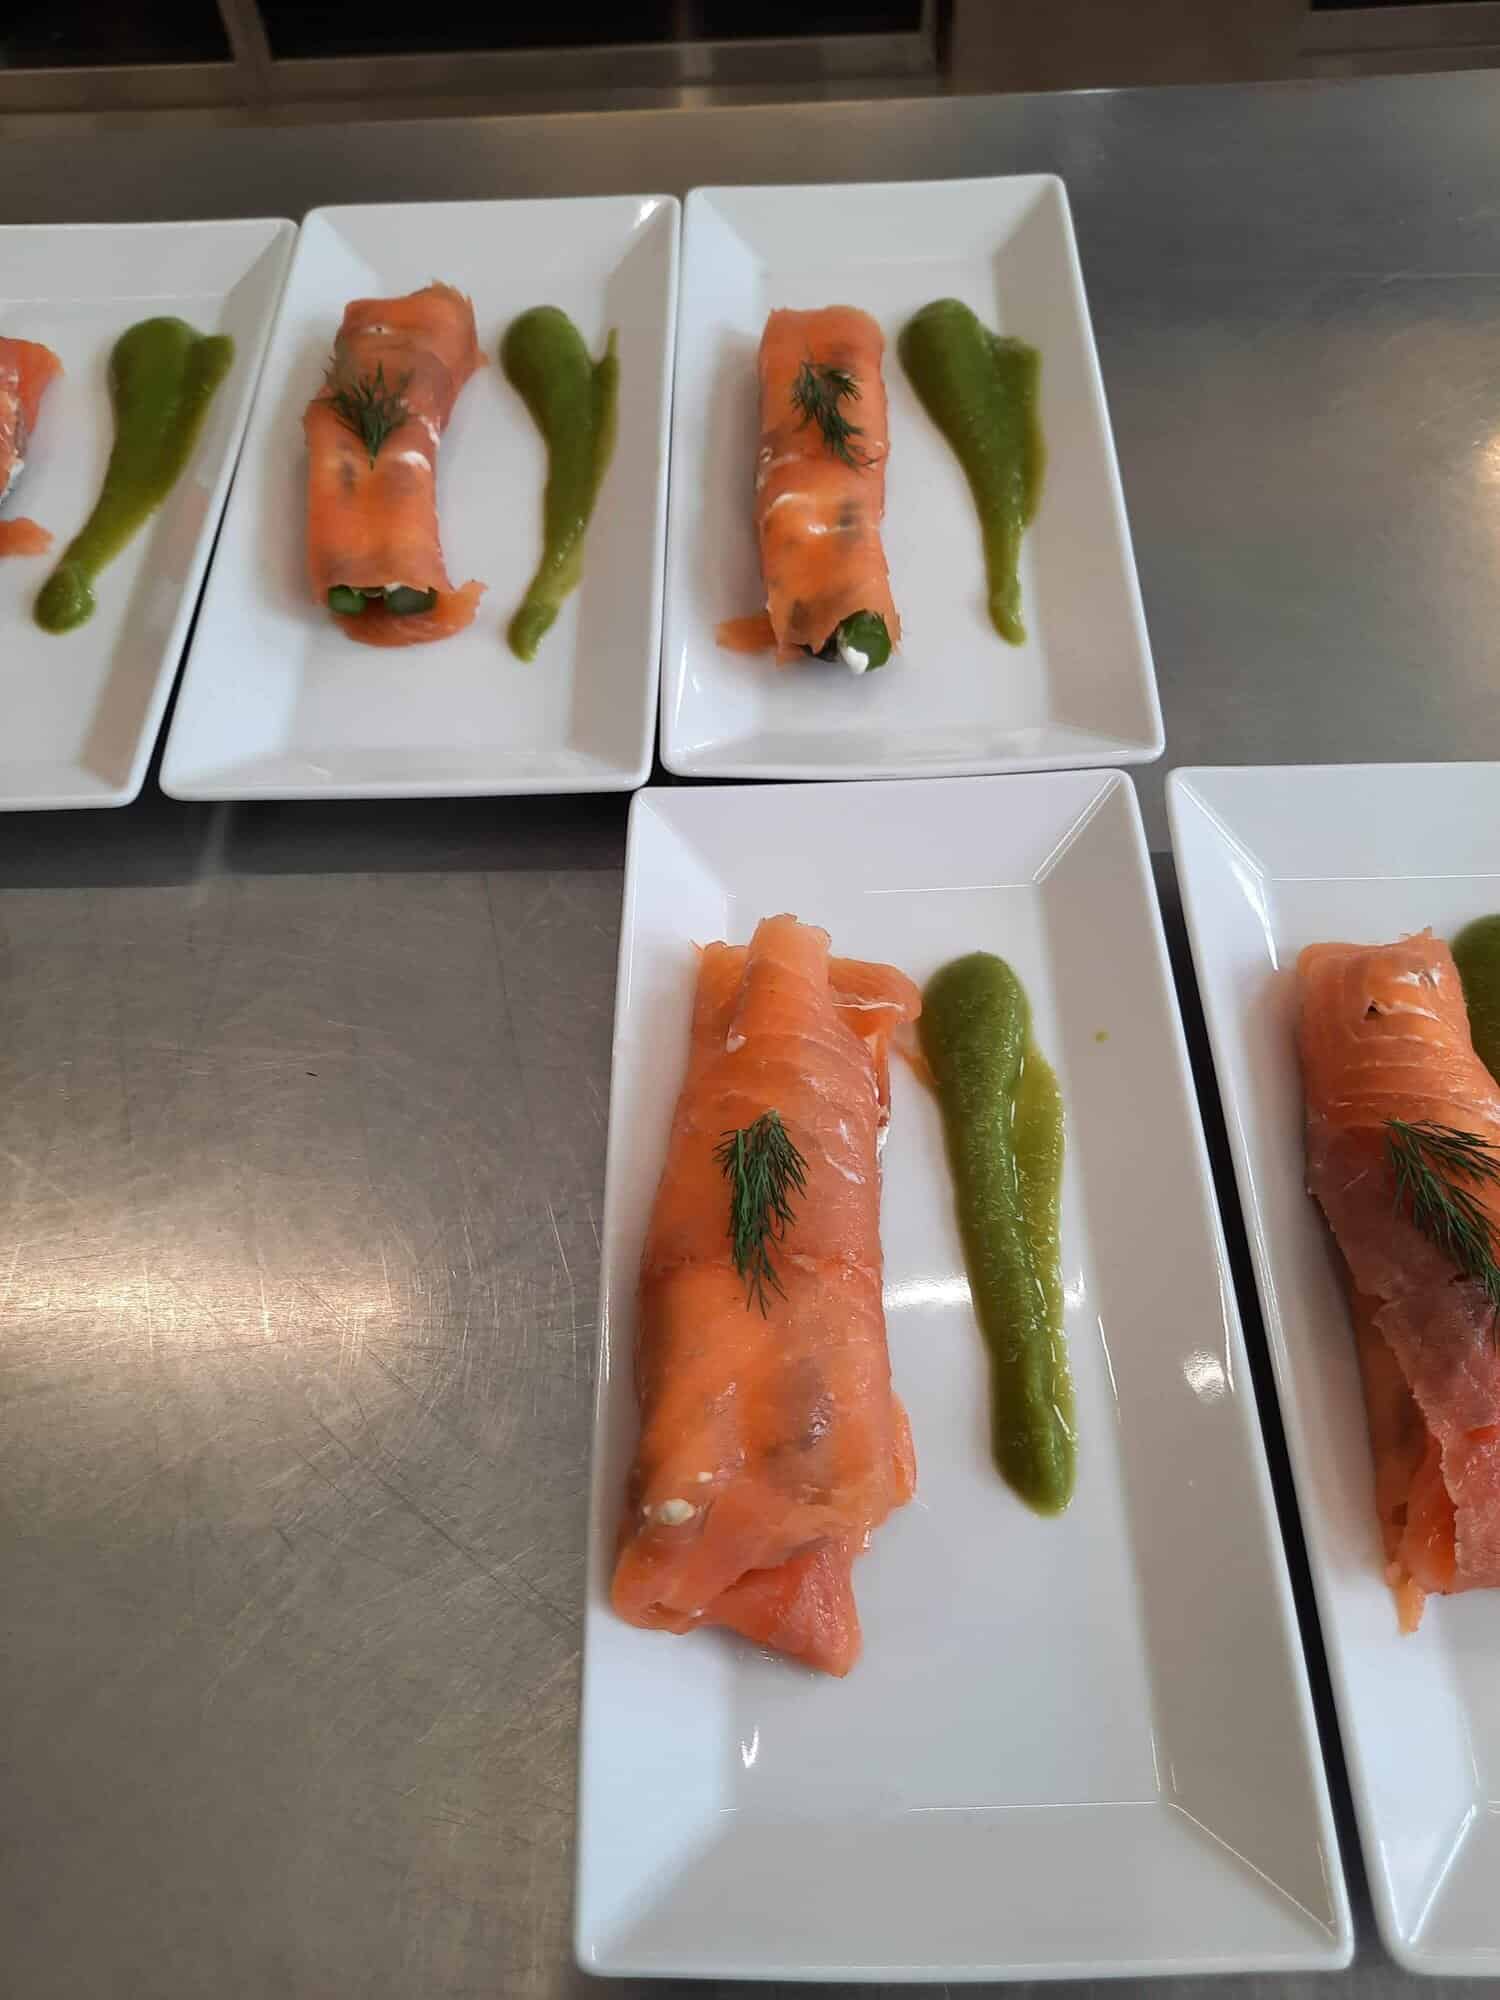 Roll up the salmon fillets tightly